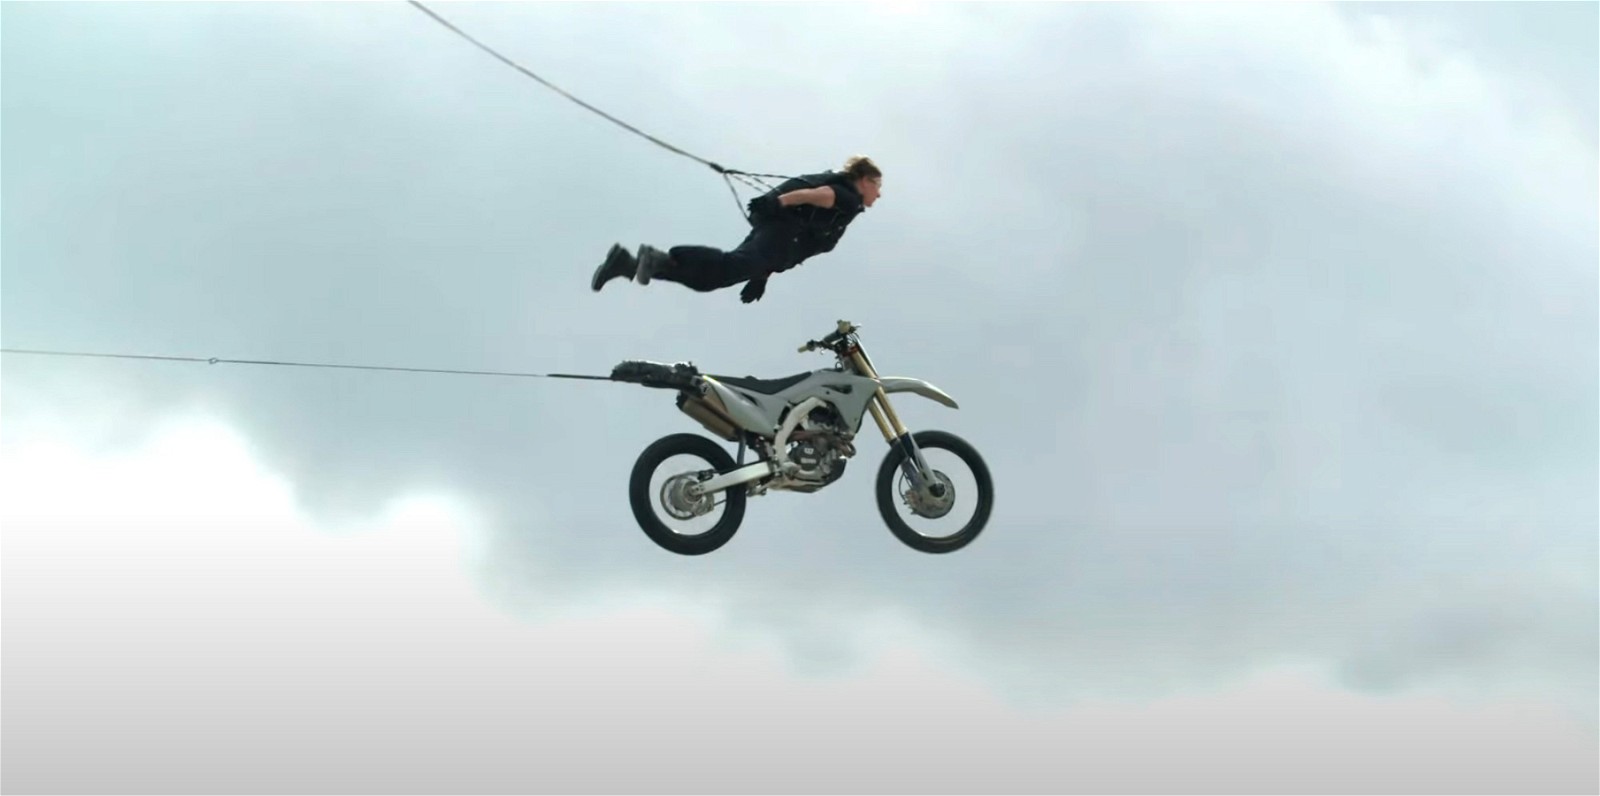 Tom Cruise flies off a cliff in Dead Reckoning